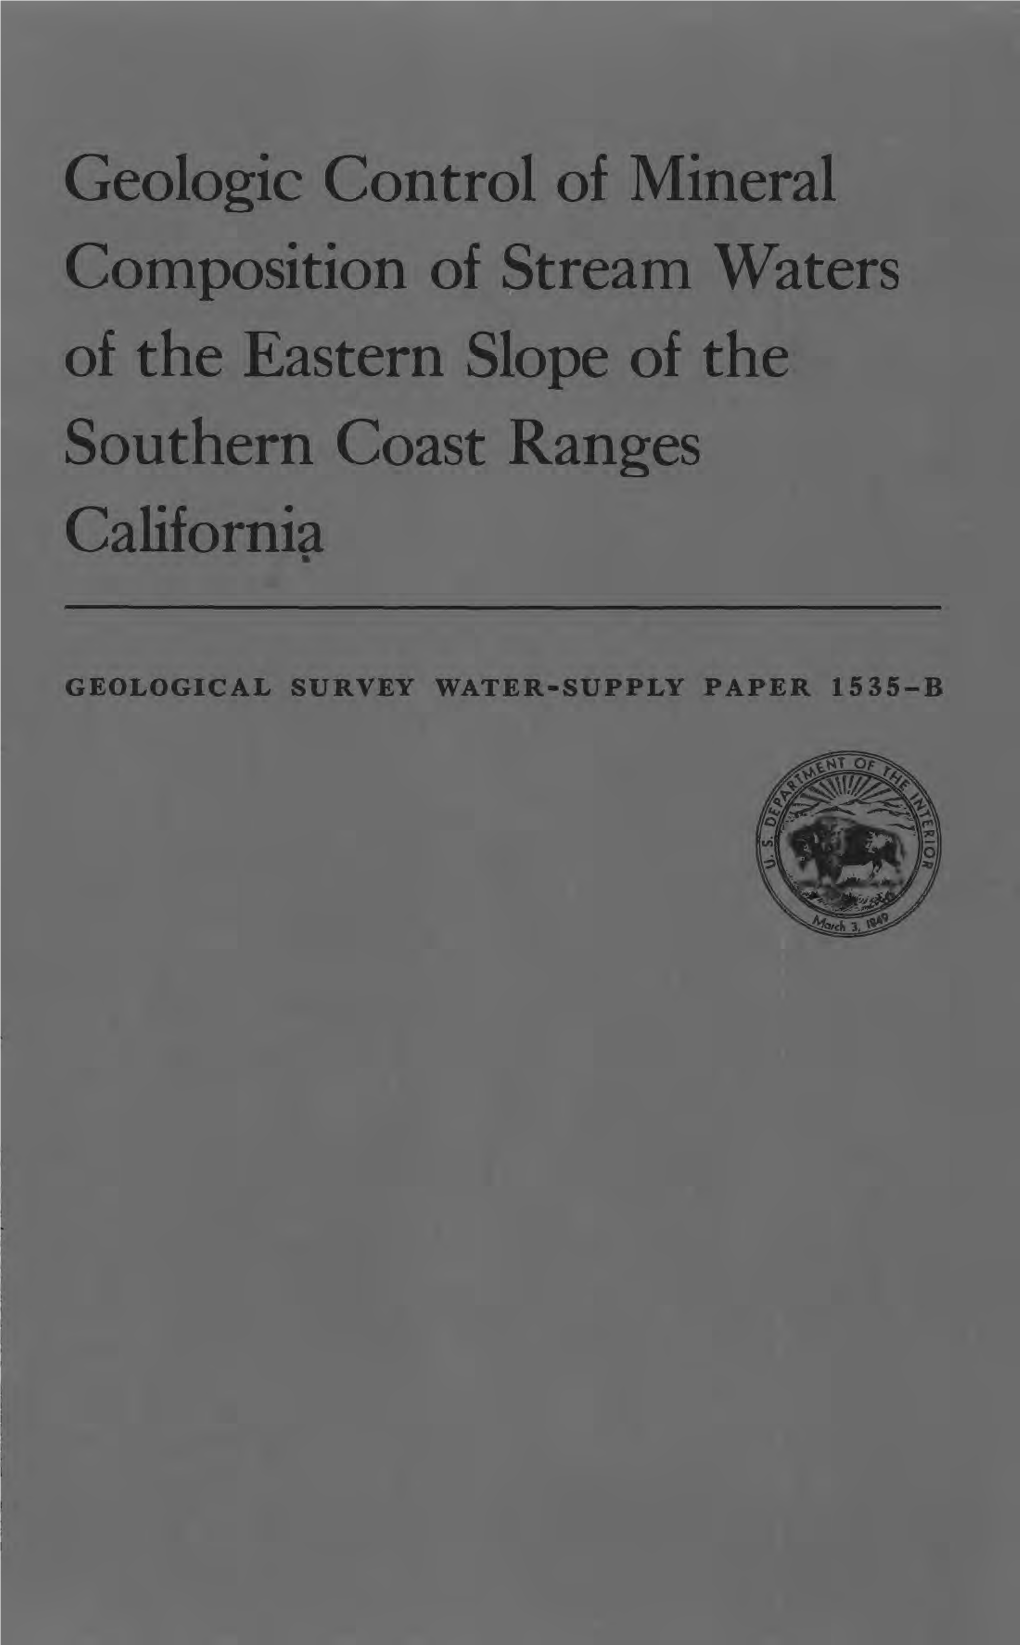 Geologic Control of Mineral Composition of Stream Waters of the Eastern Slope of the Southern Coast Ranges California